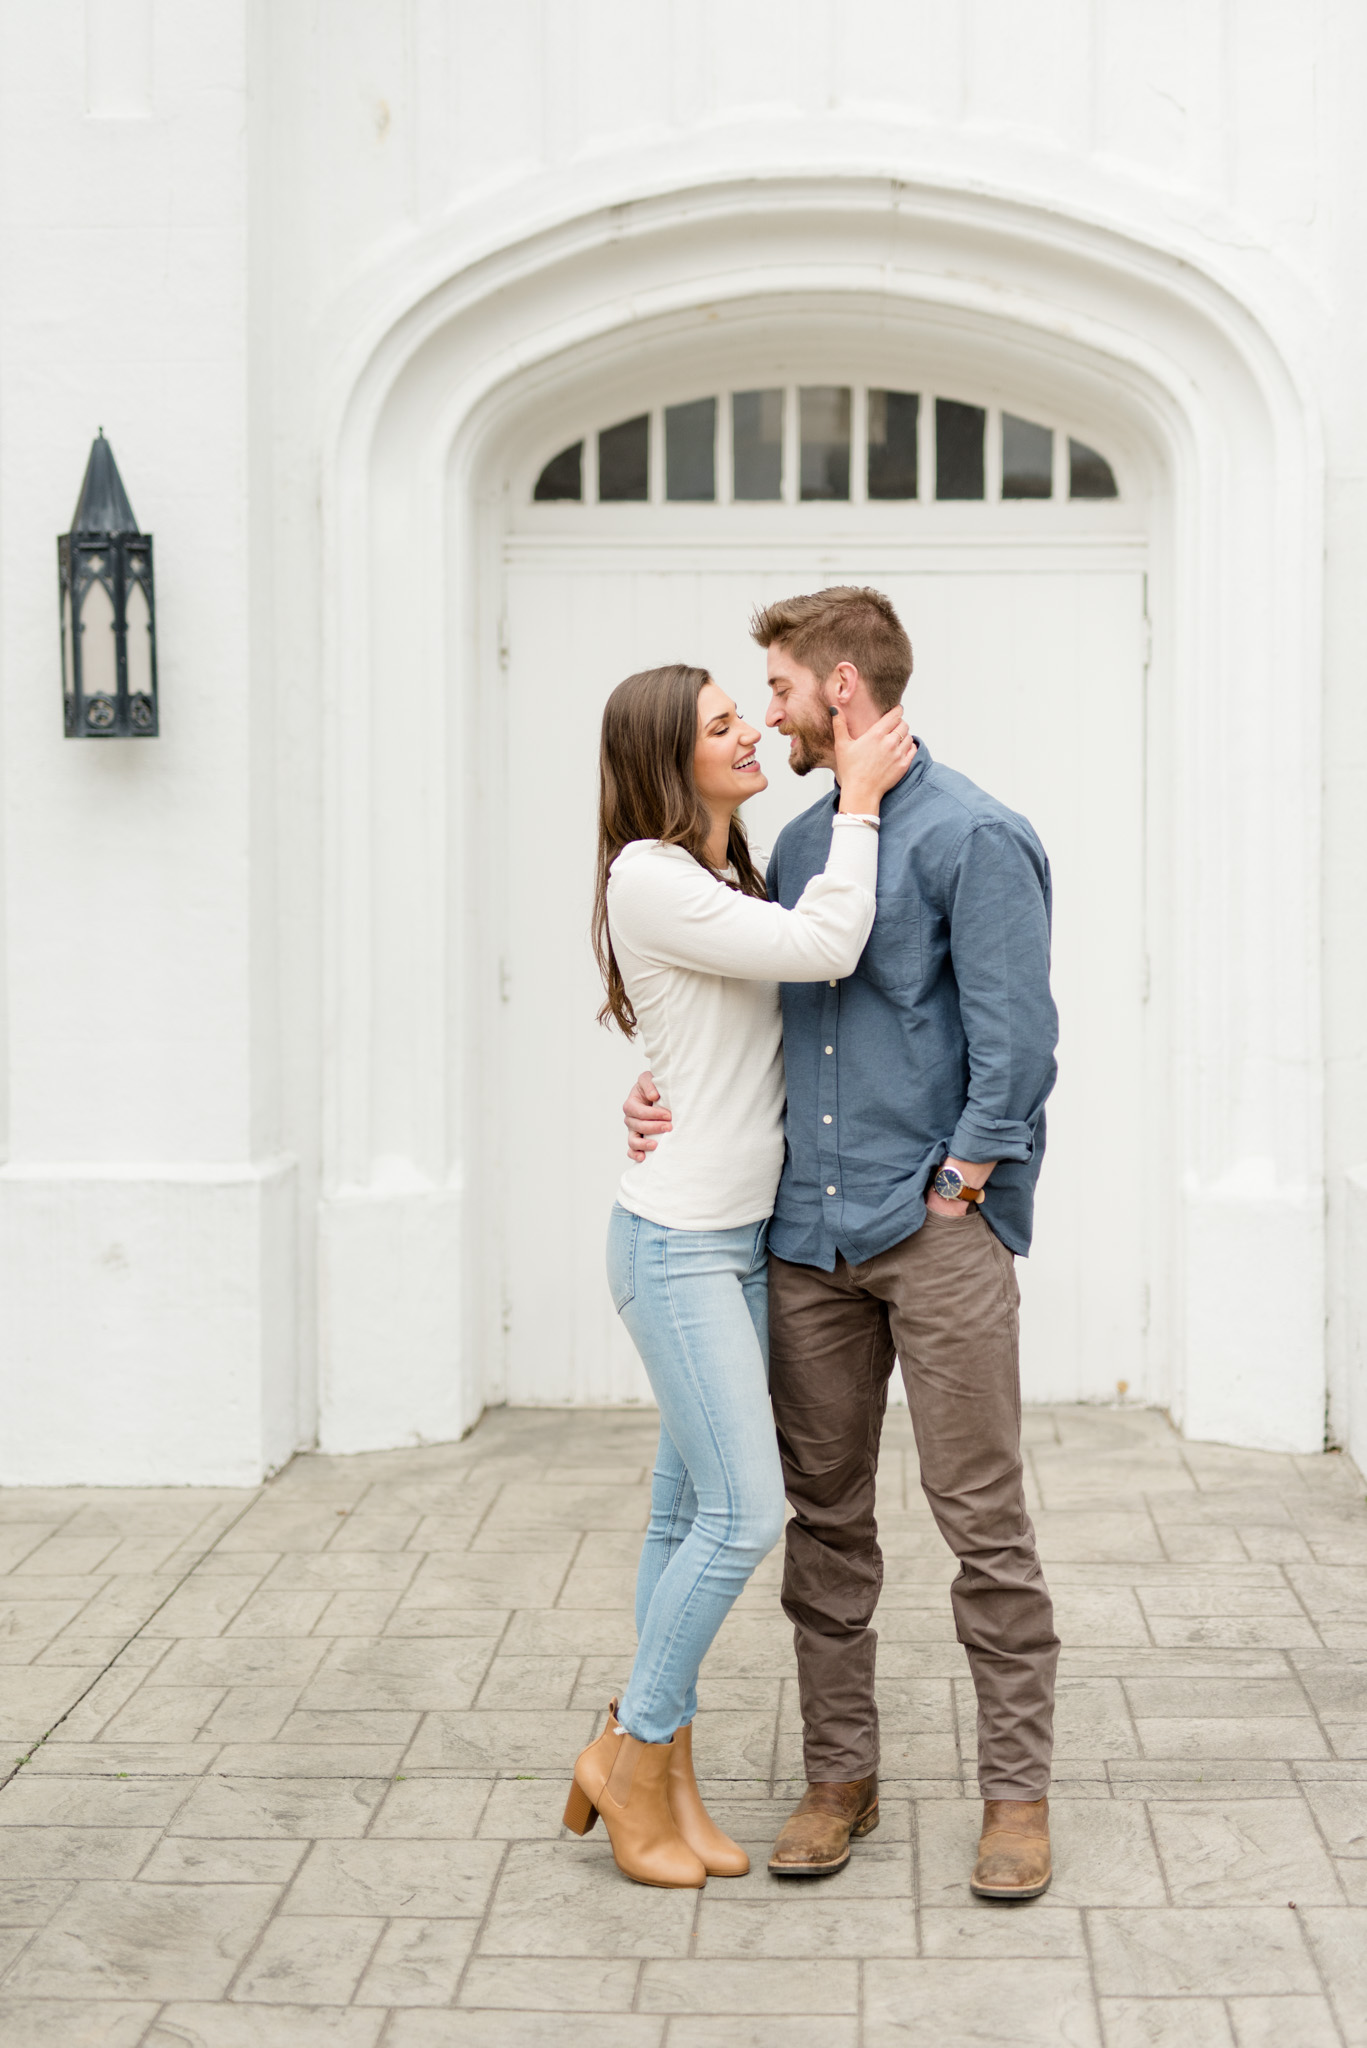 Engaged couple laughs together in front of white door.